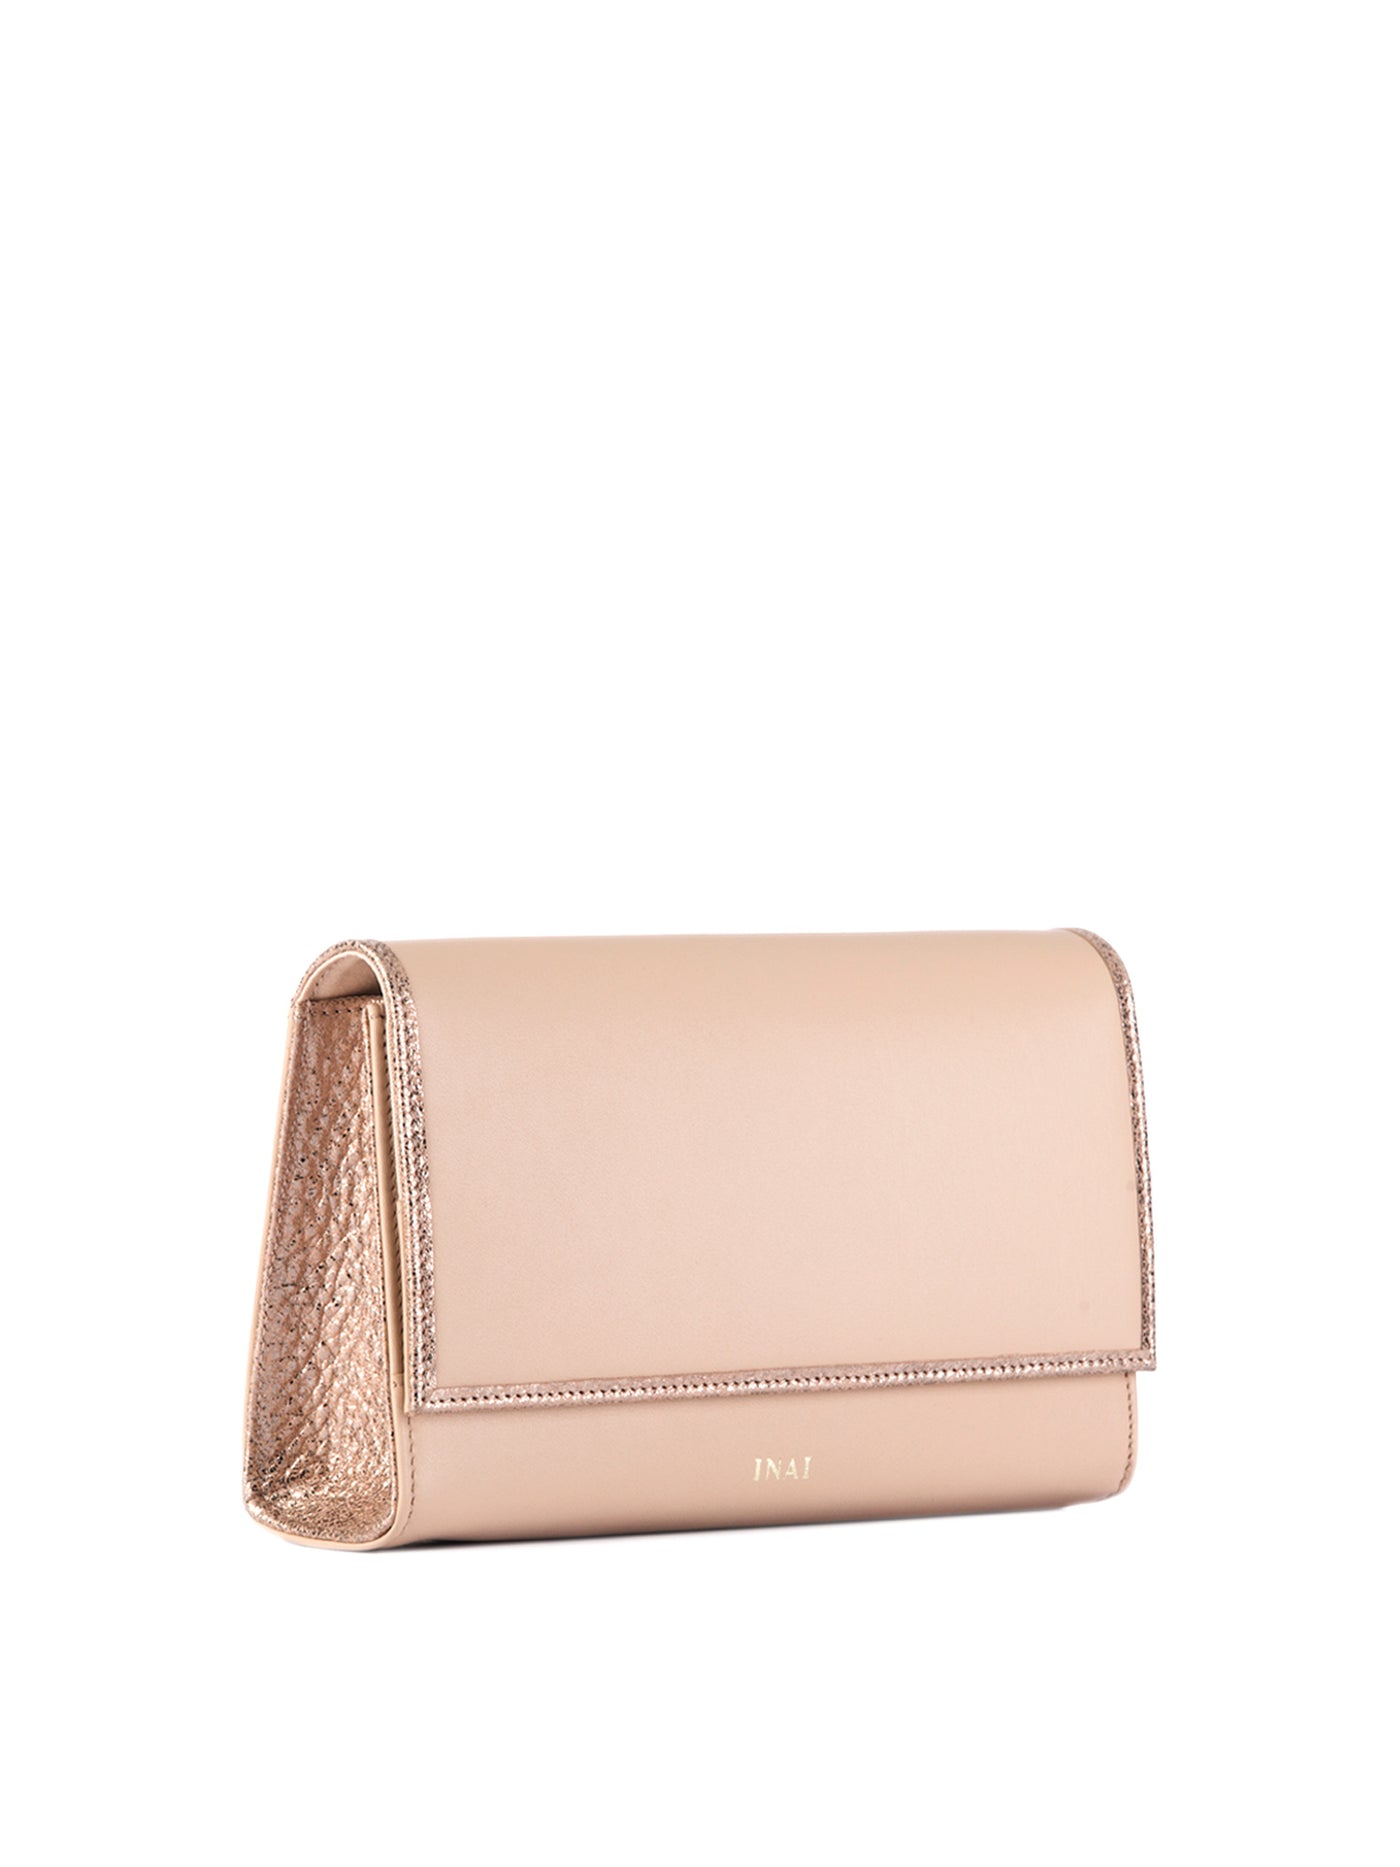 rectangular clutch with magnetic flap